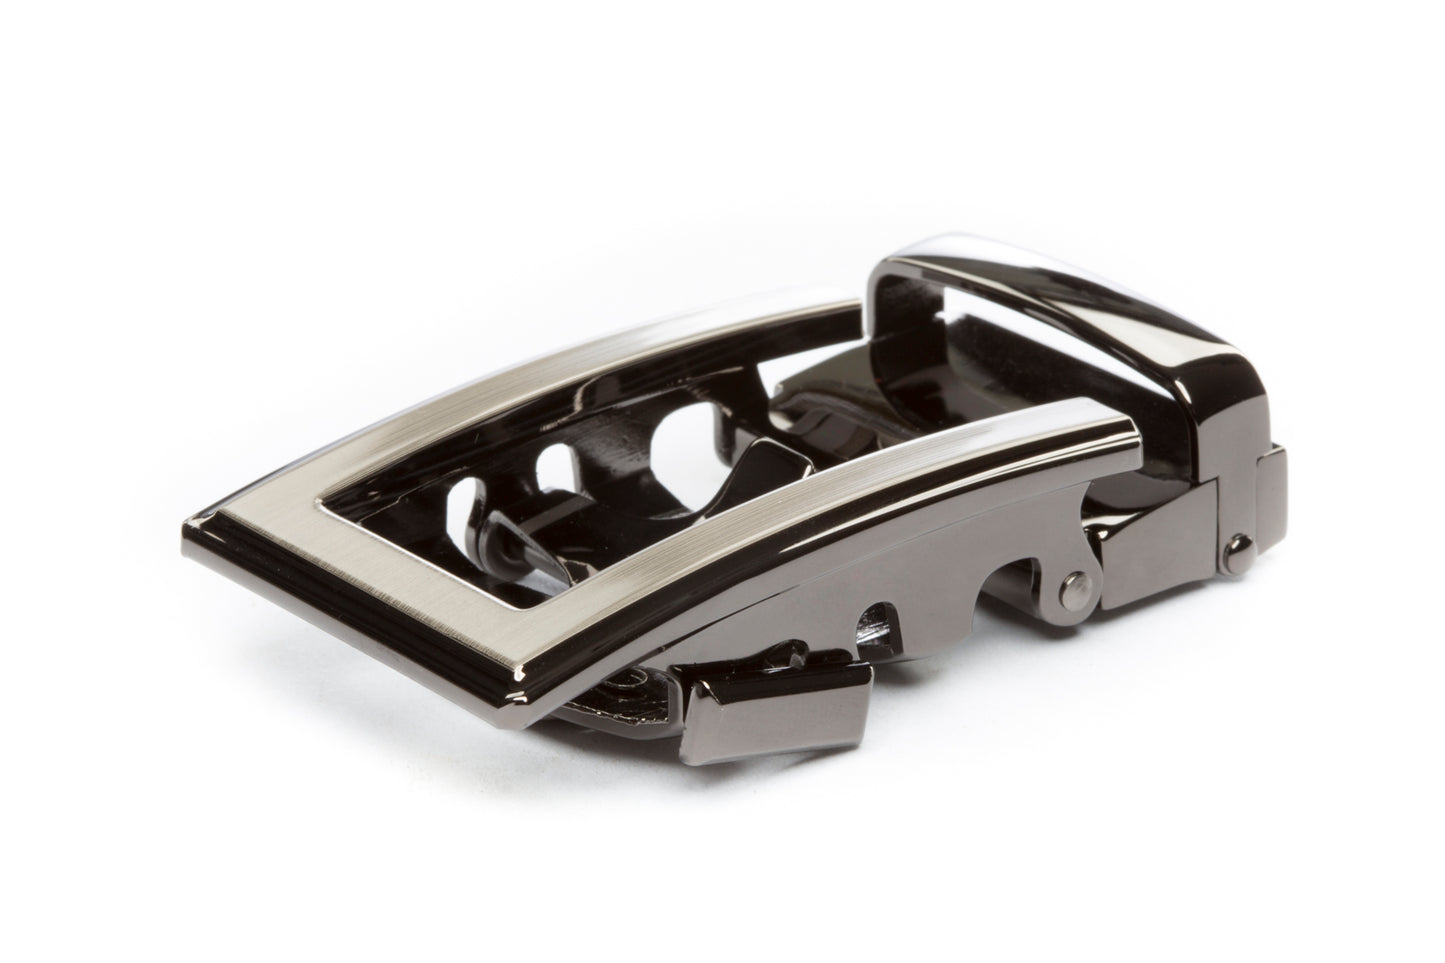 Men's traditional ratchet belt buckle in formal gunmetal with a width of 1.5 inches.